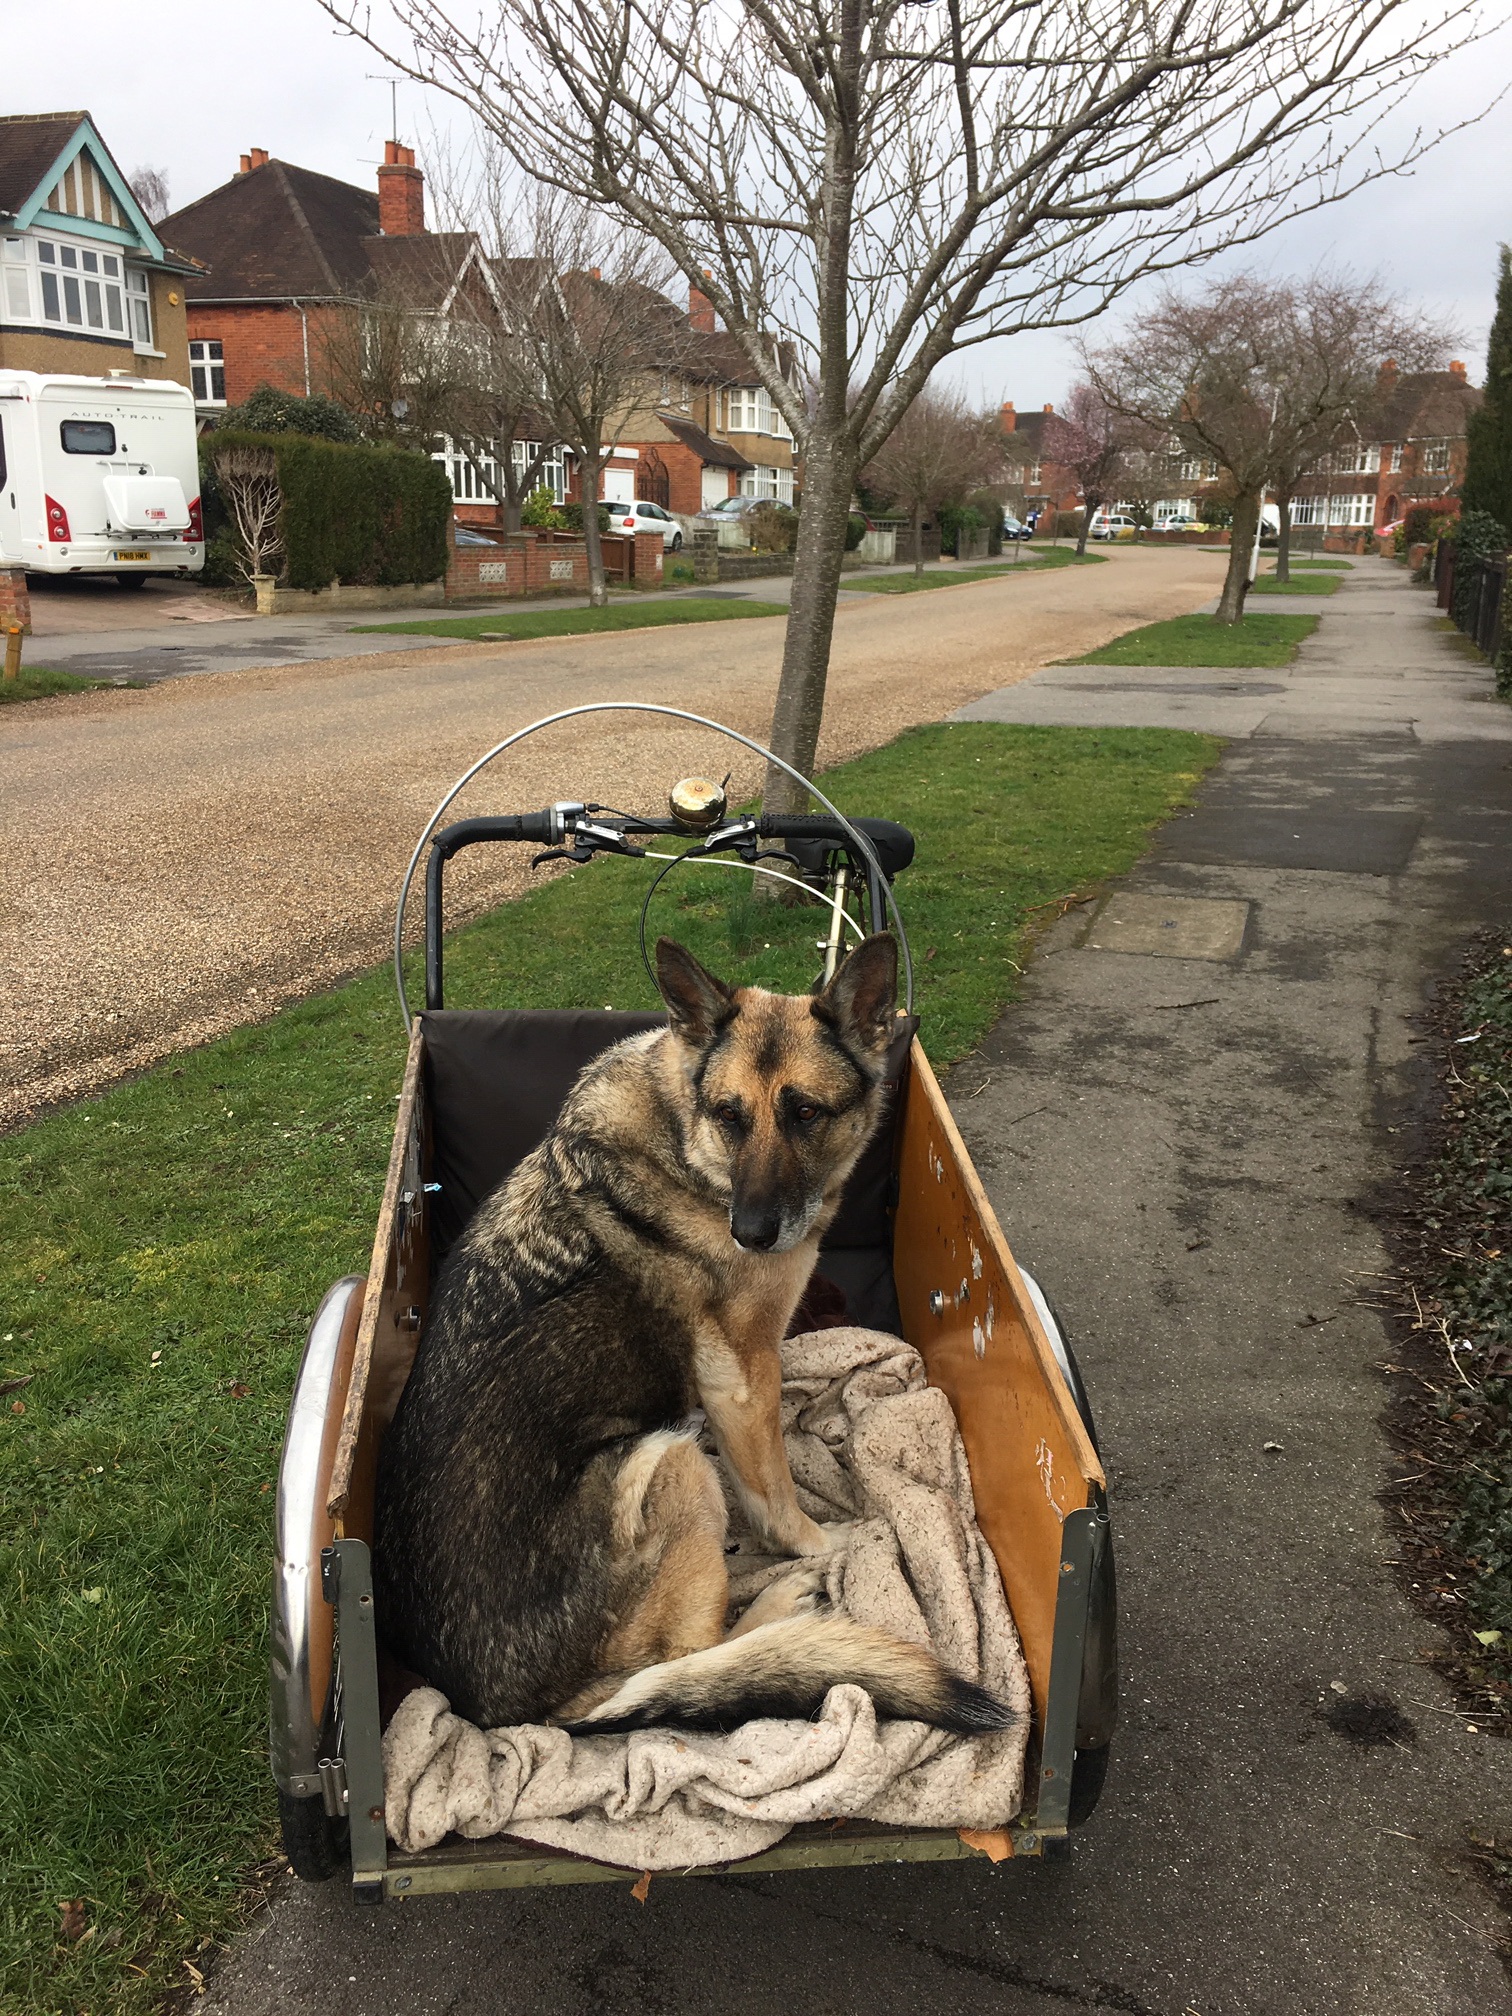 The trike with dog